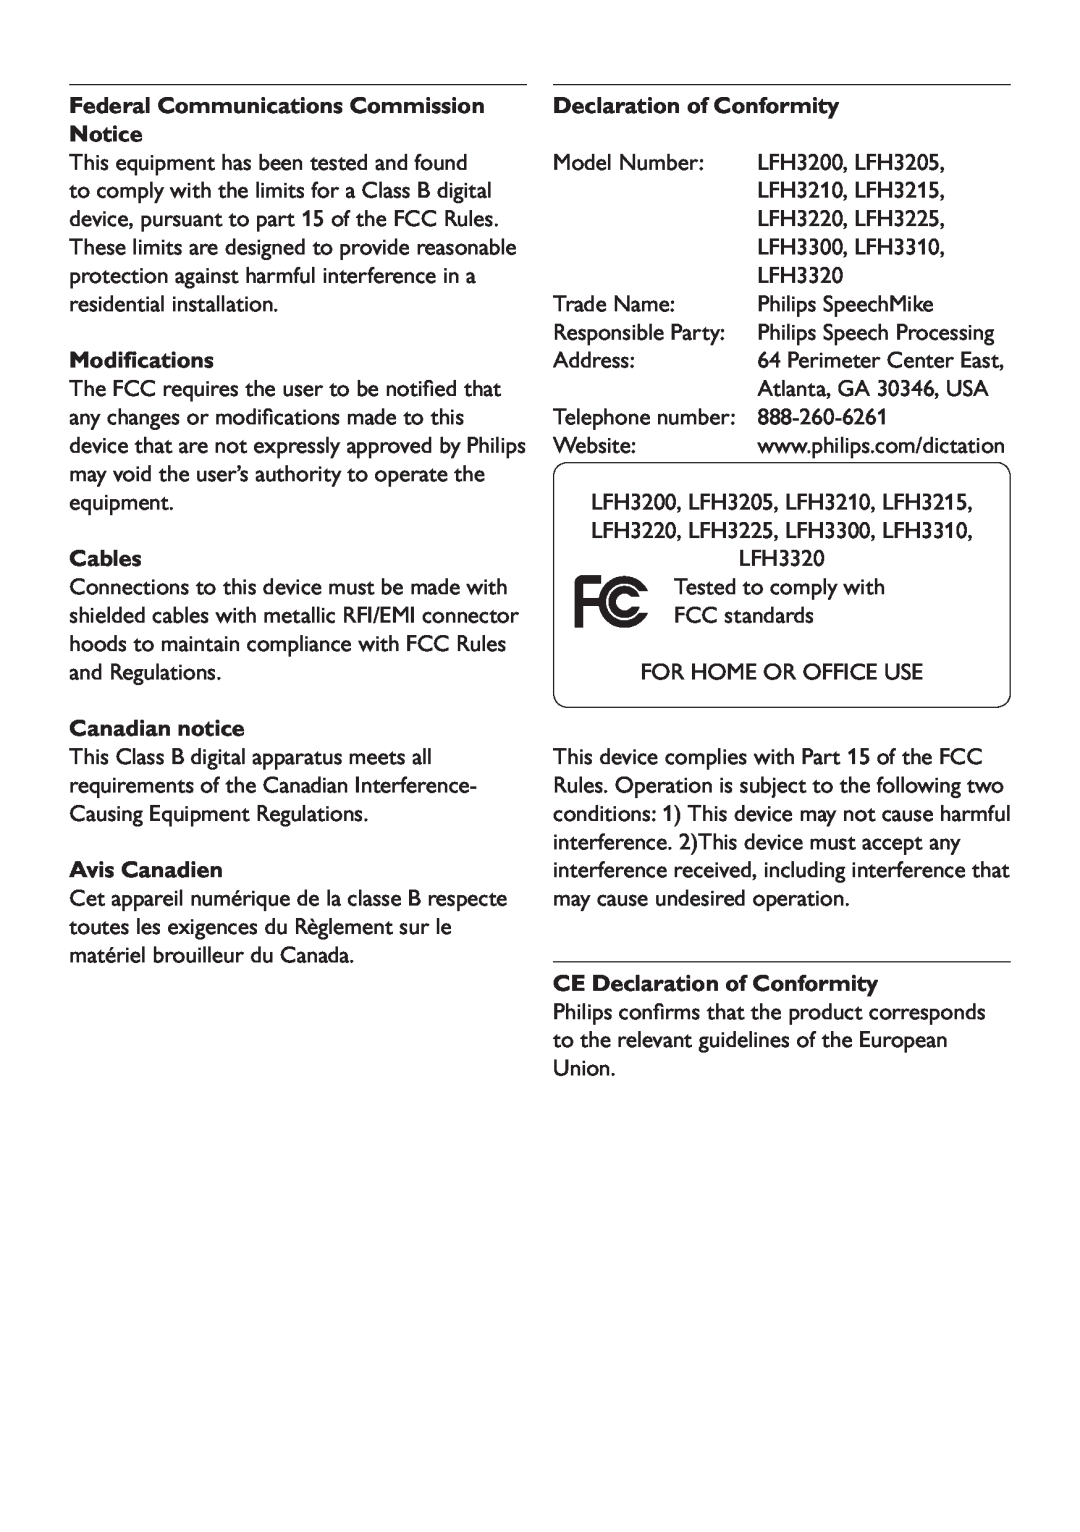 Philips LFH3200 user manual Federal Communications Commission Notice, Modifications, Cables, Canadian notice, Avis Canadien 